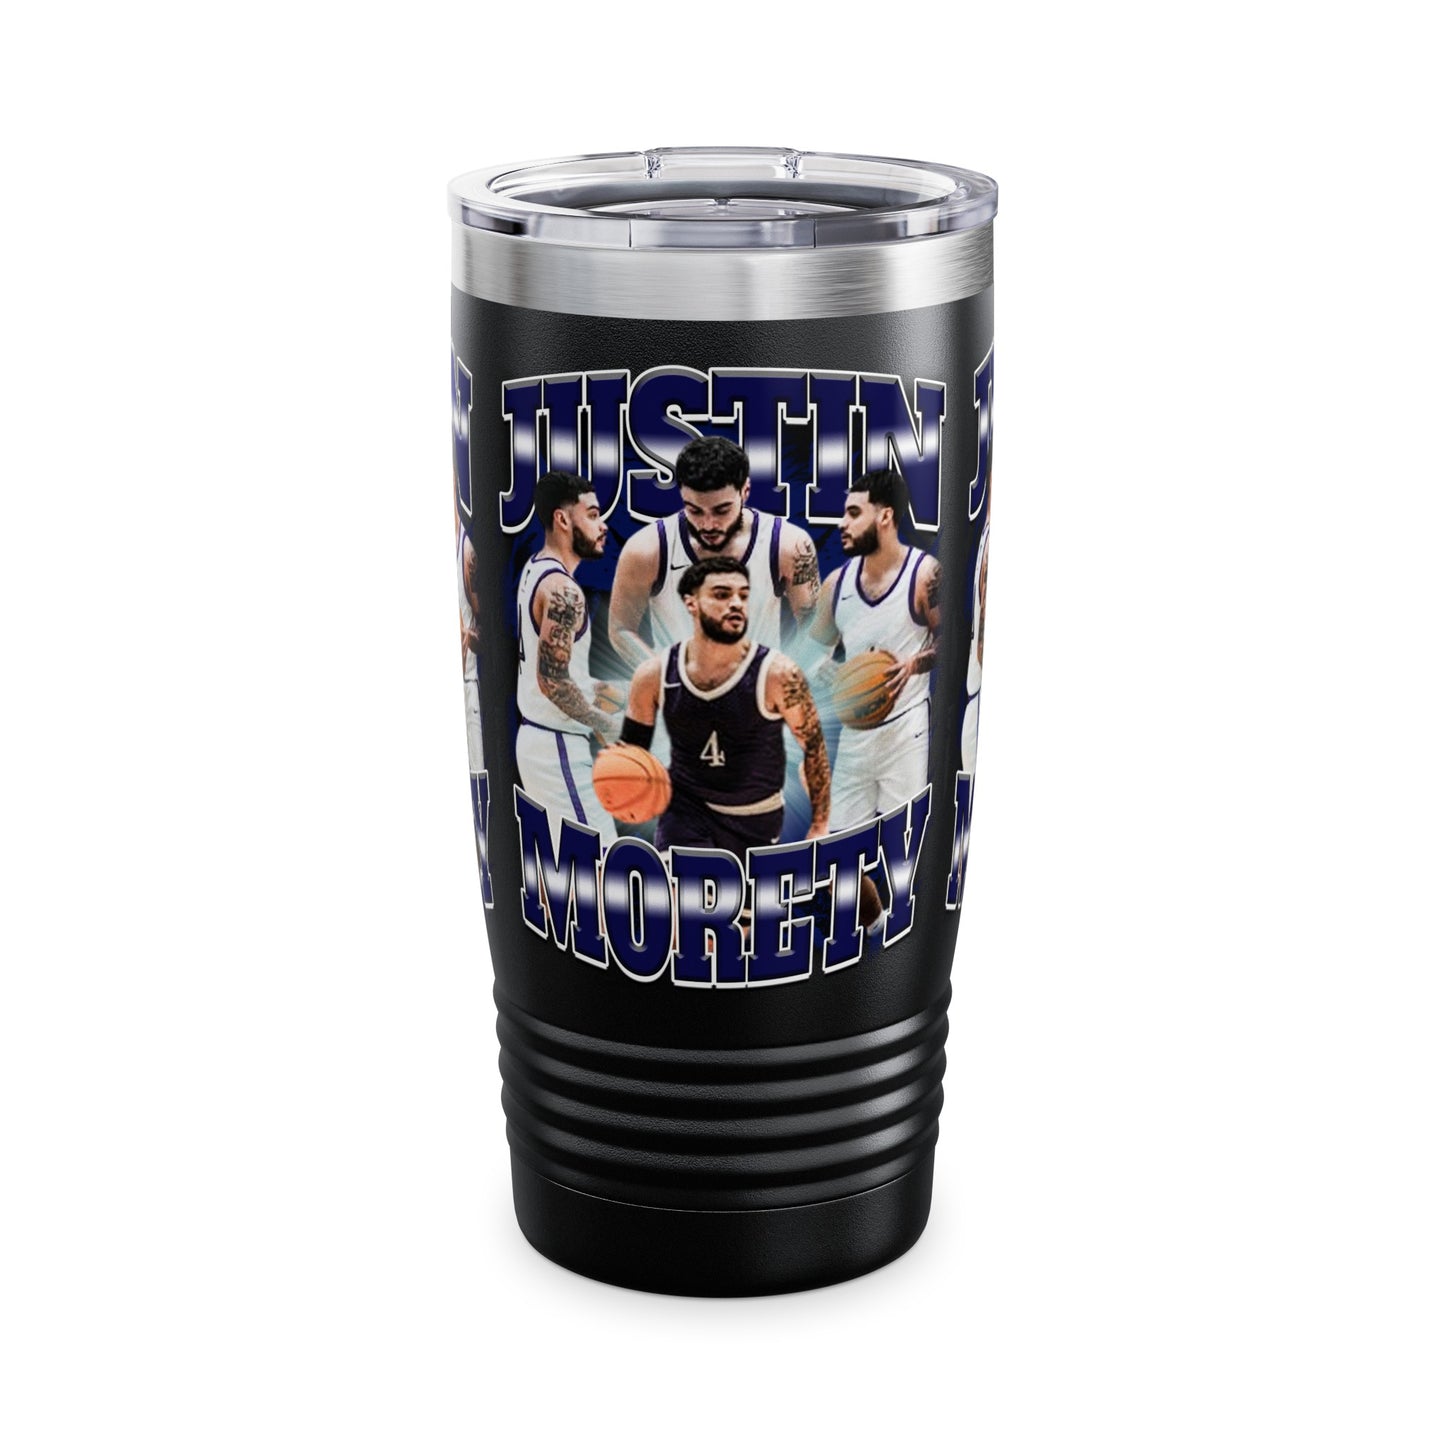 Justin Morety Stainless Steal Tumbler